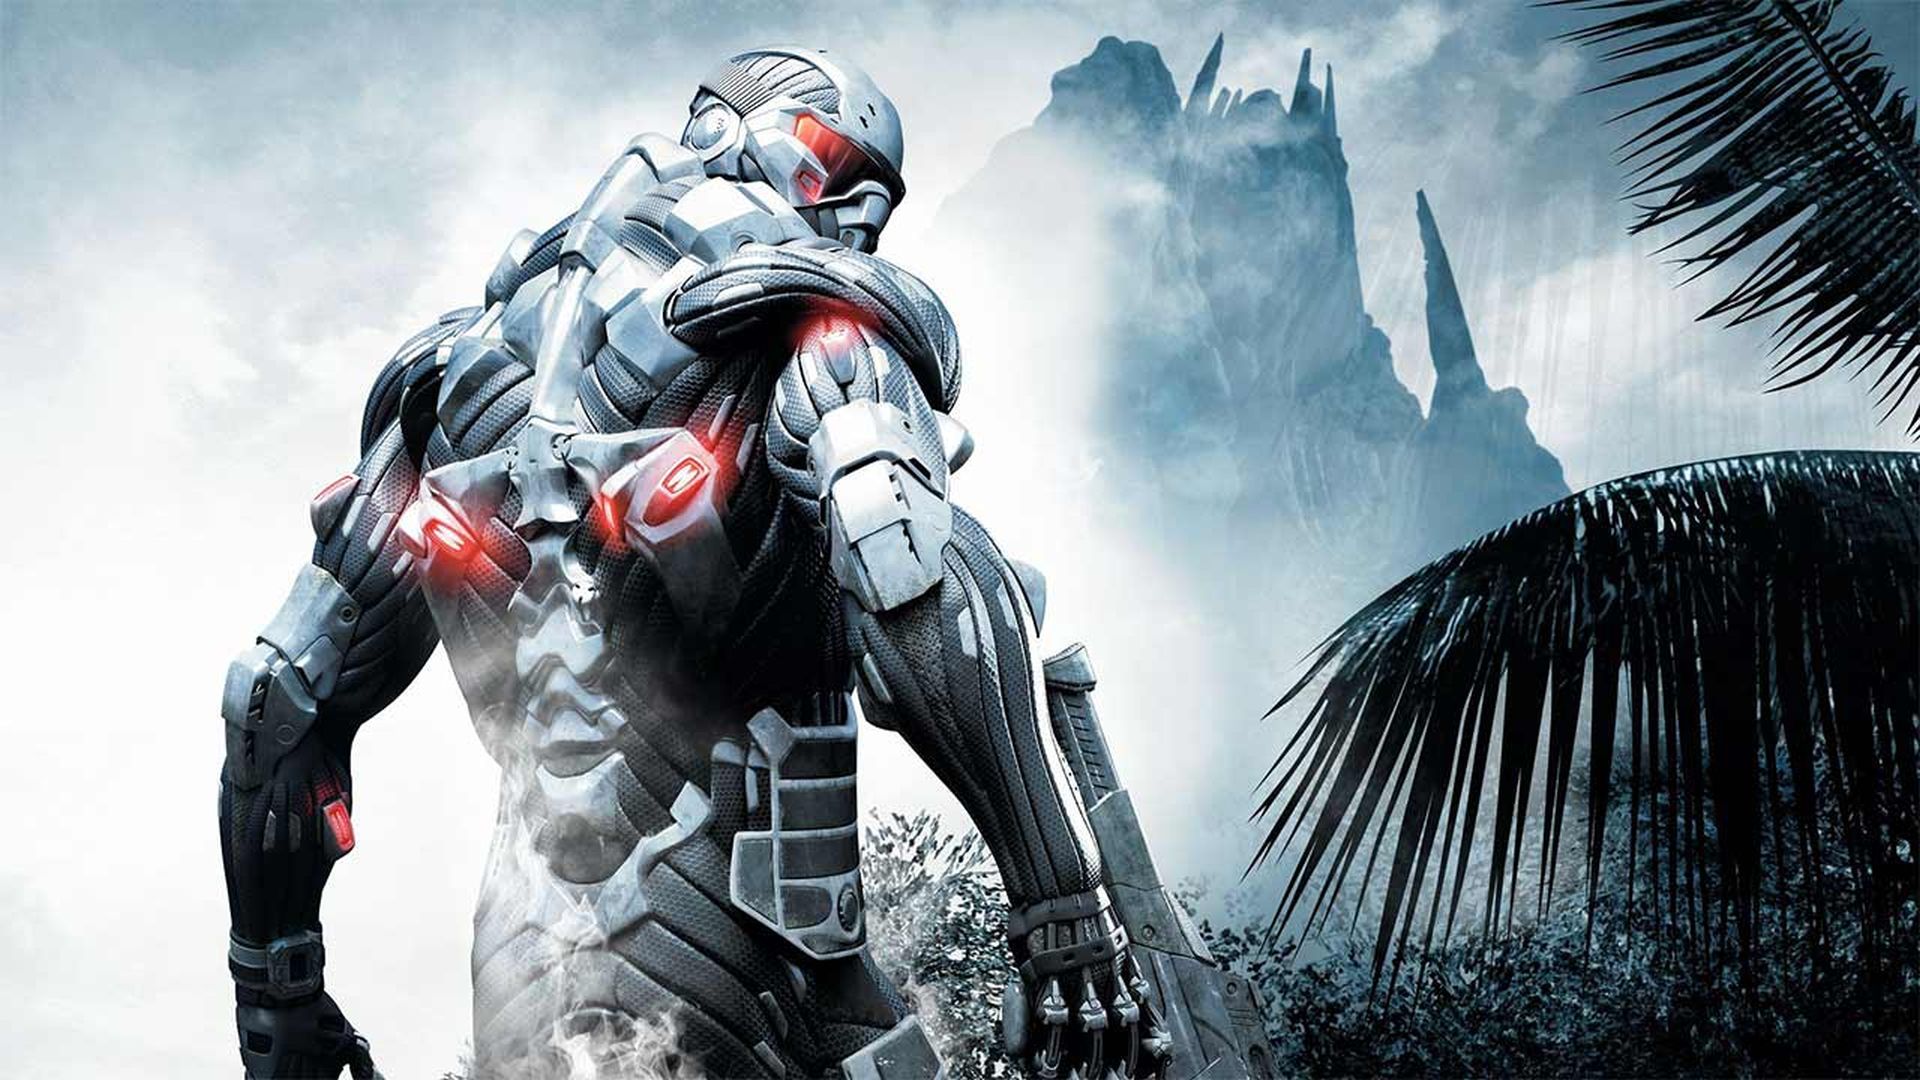 crysis remastered xbox store